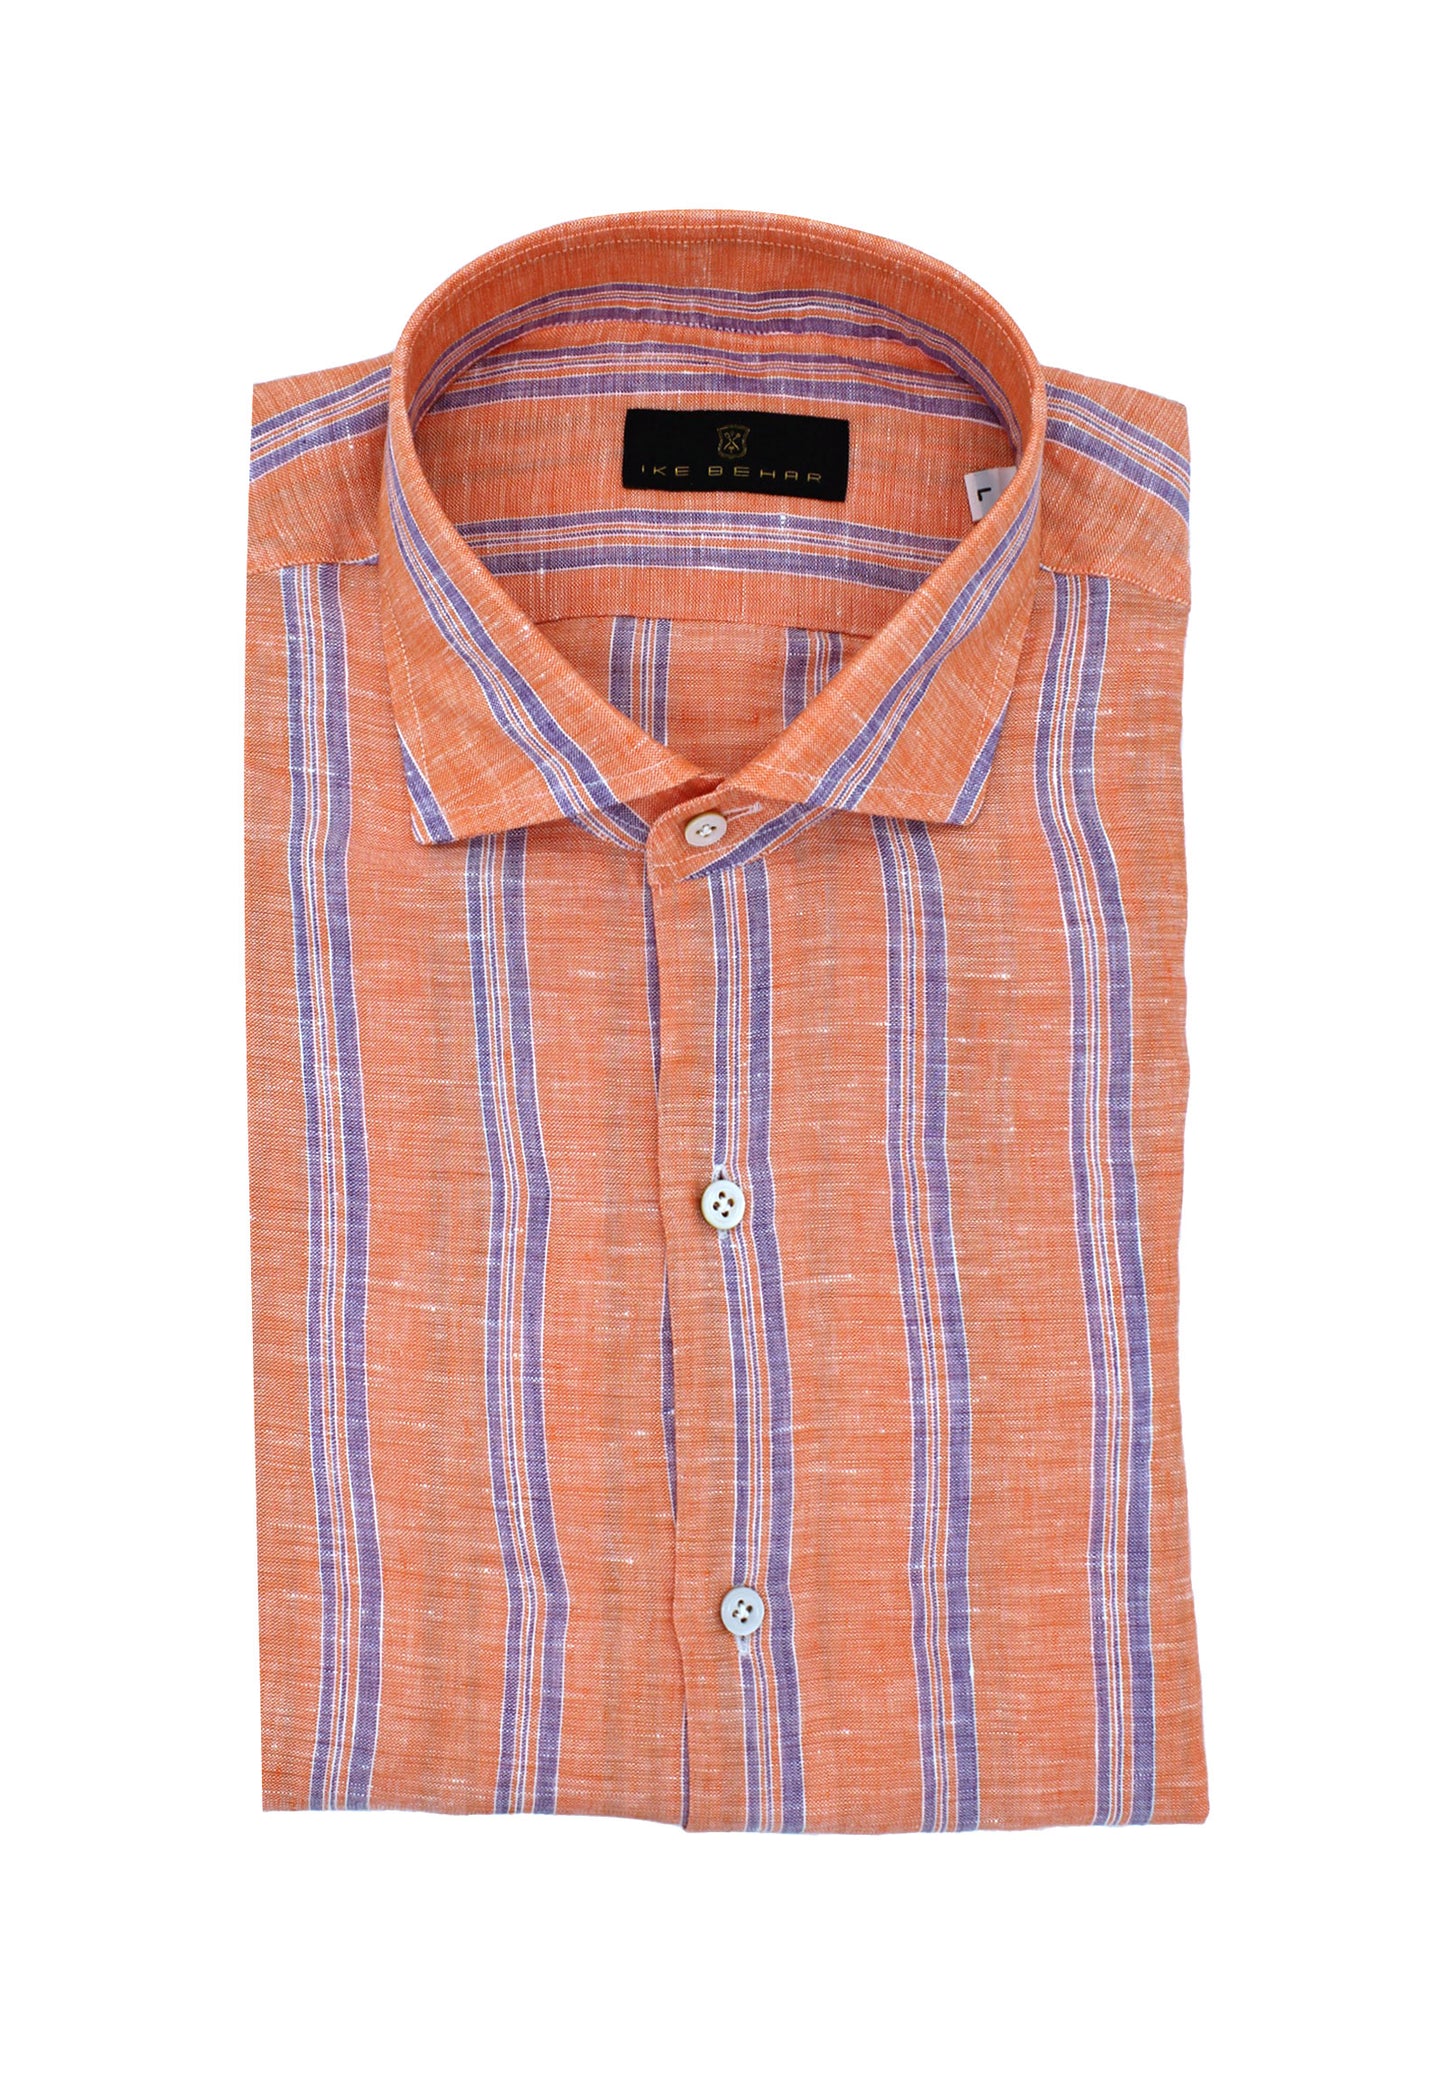 Hand Finished Orange With Violet Striped Italian Linen Sport Shirt